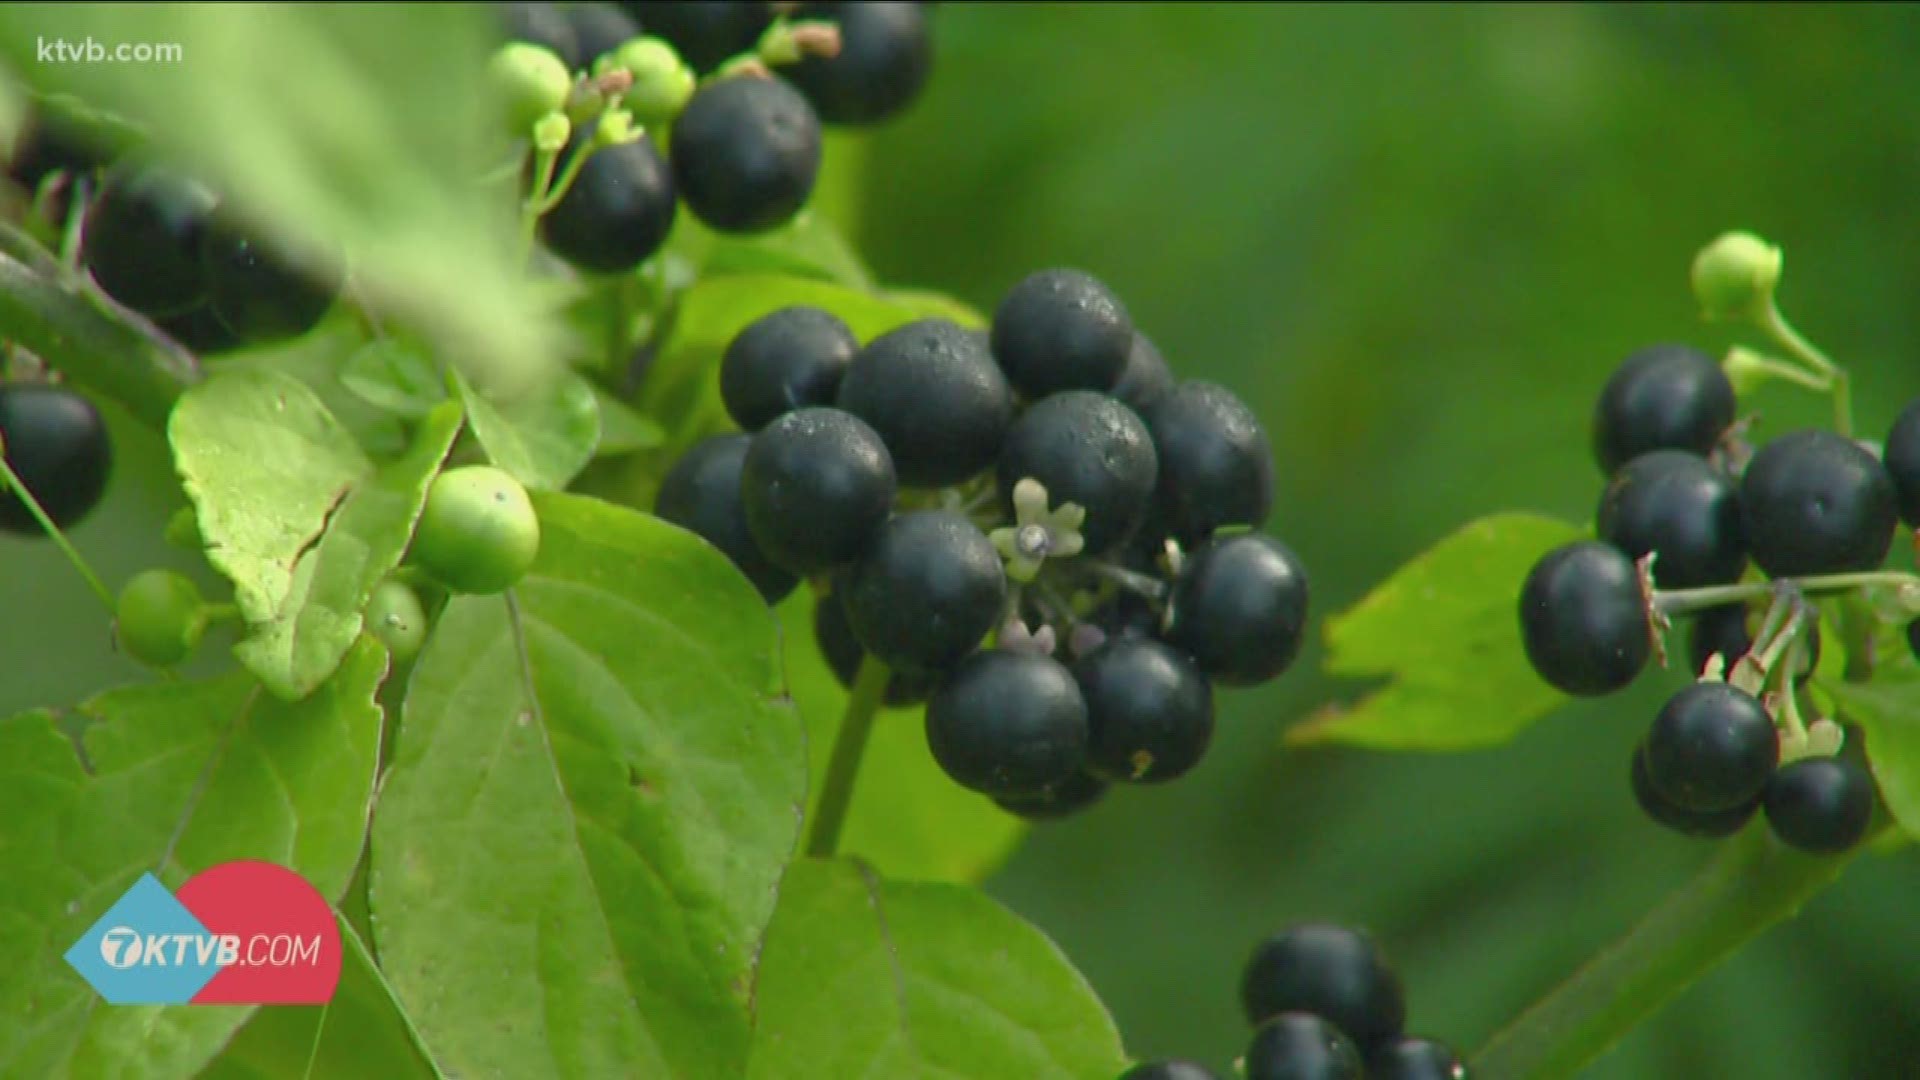 It's an Idaho staple, and is found in everything from pies to vodka - but what makes this finicky berry so Idaho?